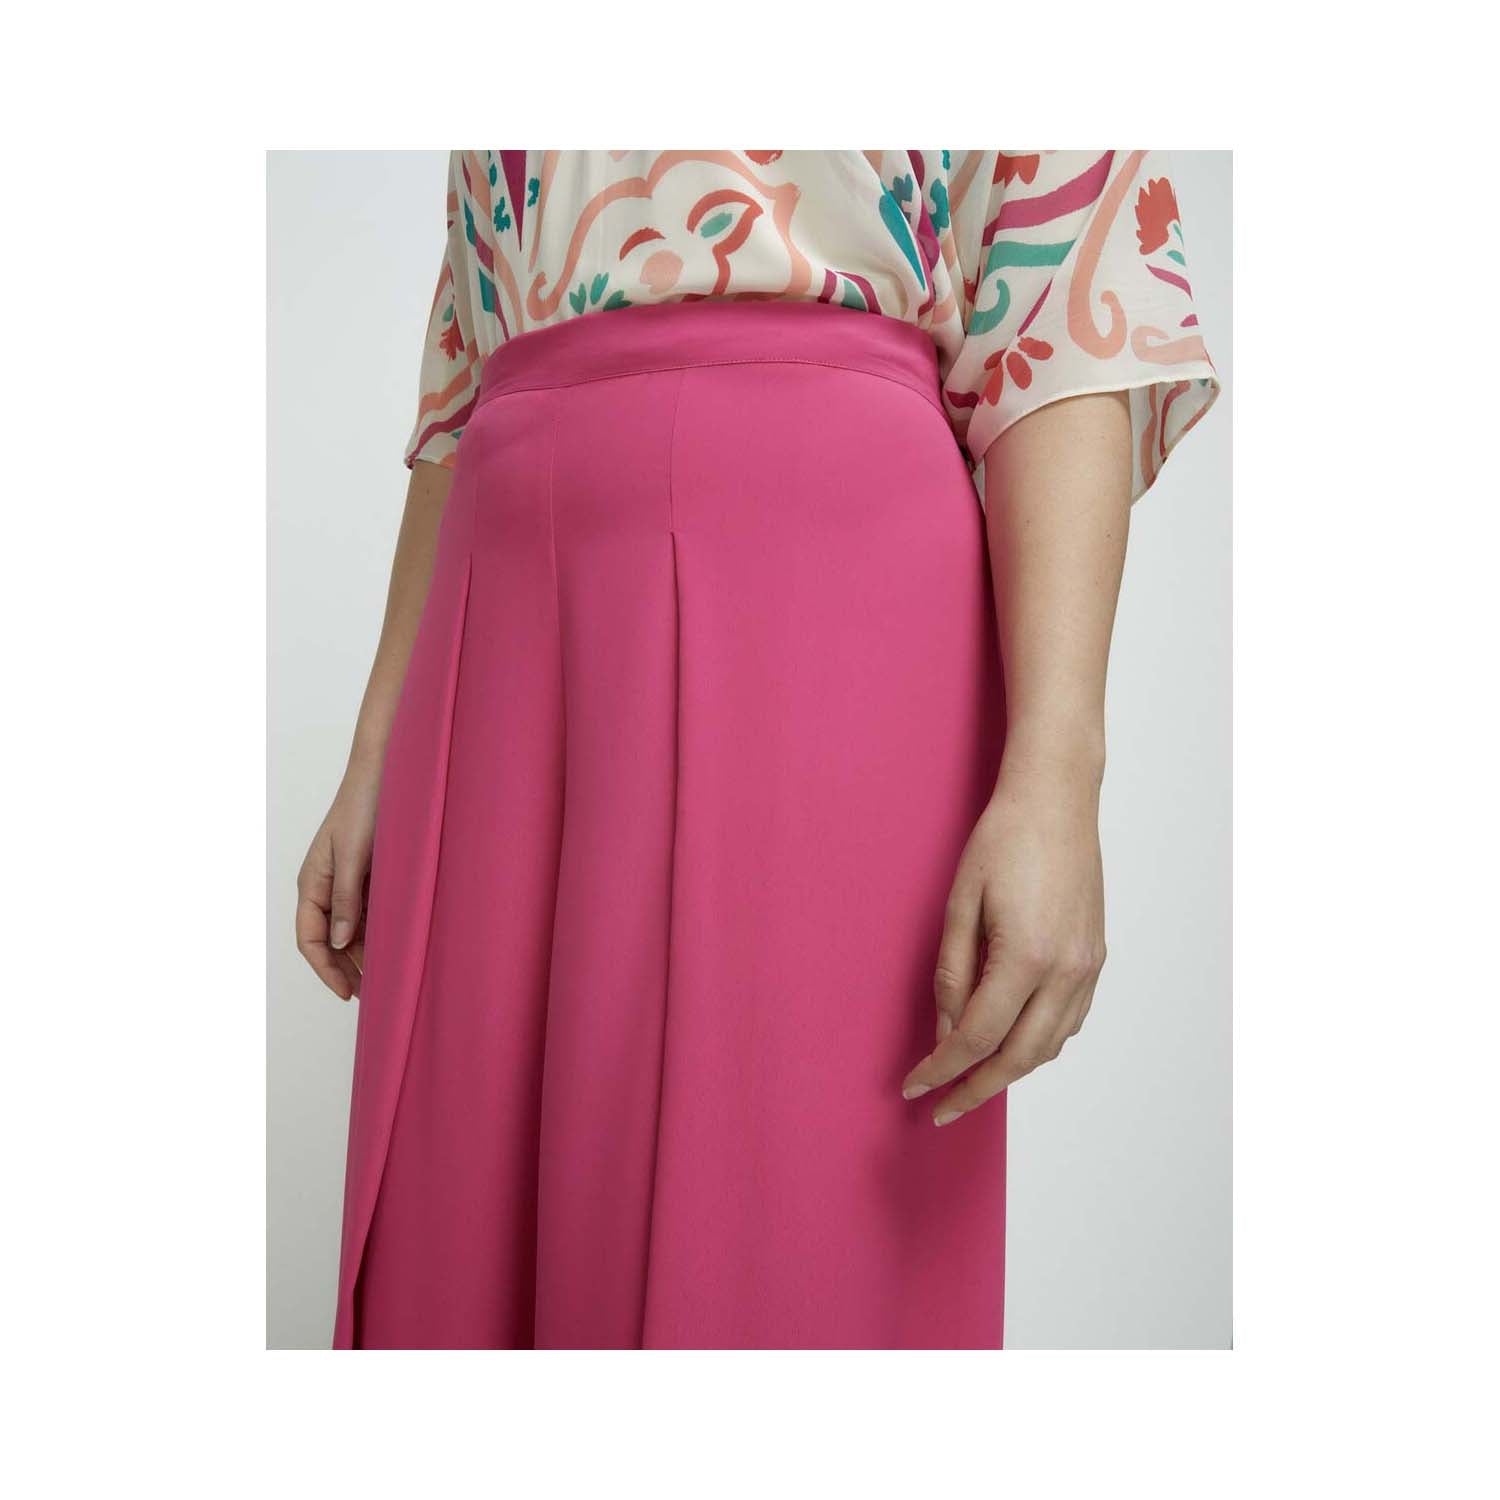 Couchel Plain-Coloured Loose-Fitting Wide-Leg Trousers - Fuchsia 2 Shaws Department Stores